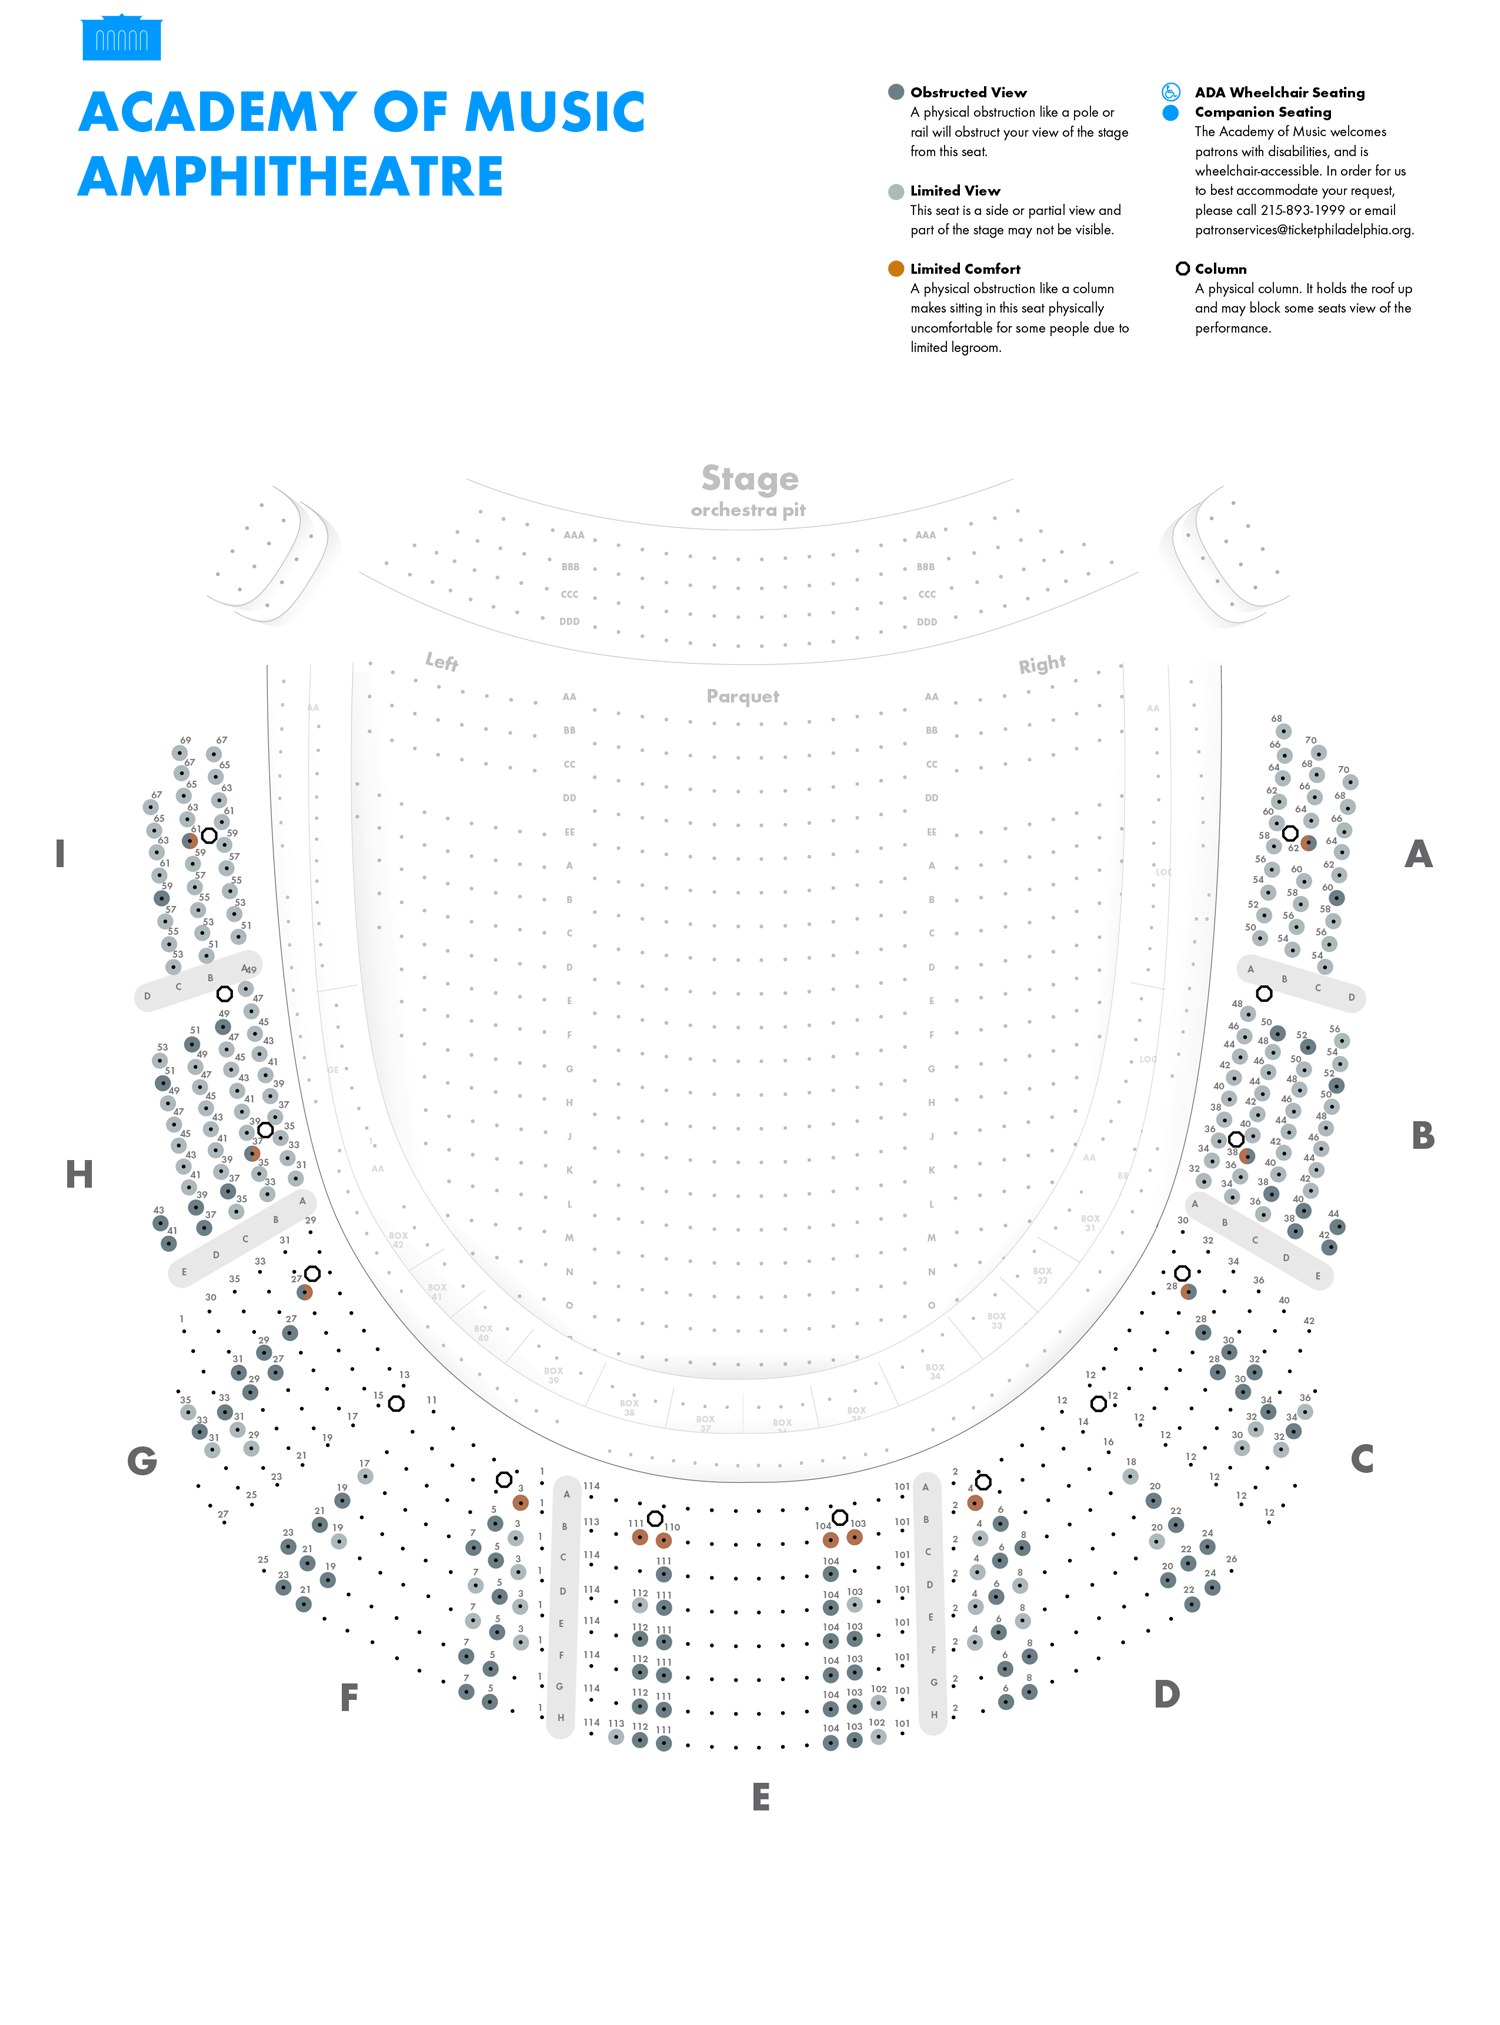 The Fred Amphitheater Seating Chart